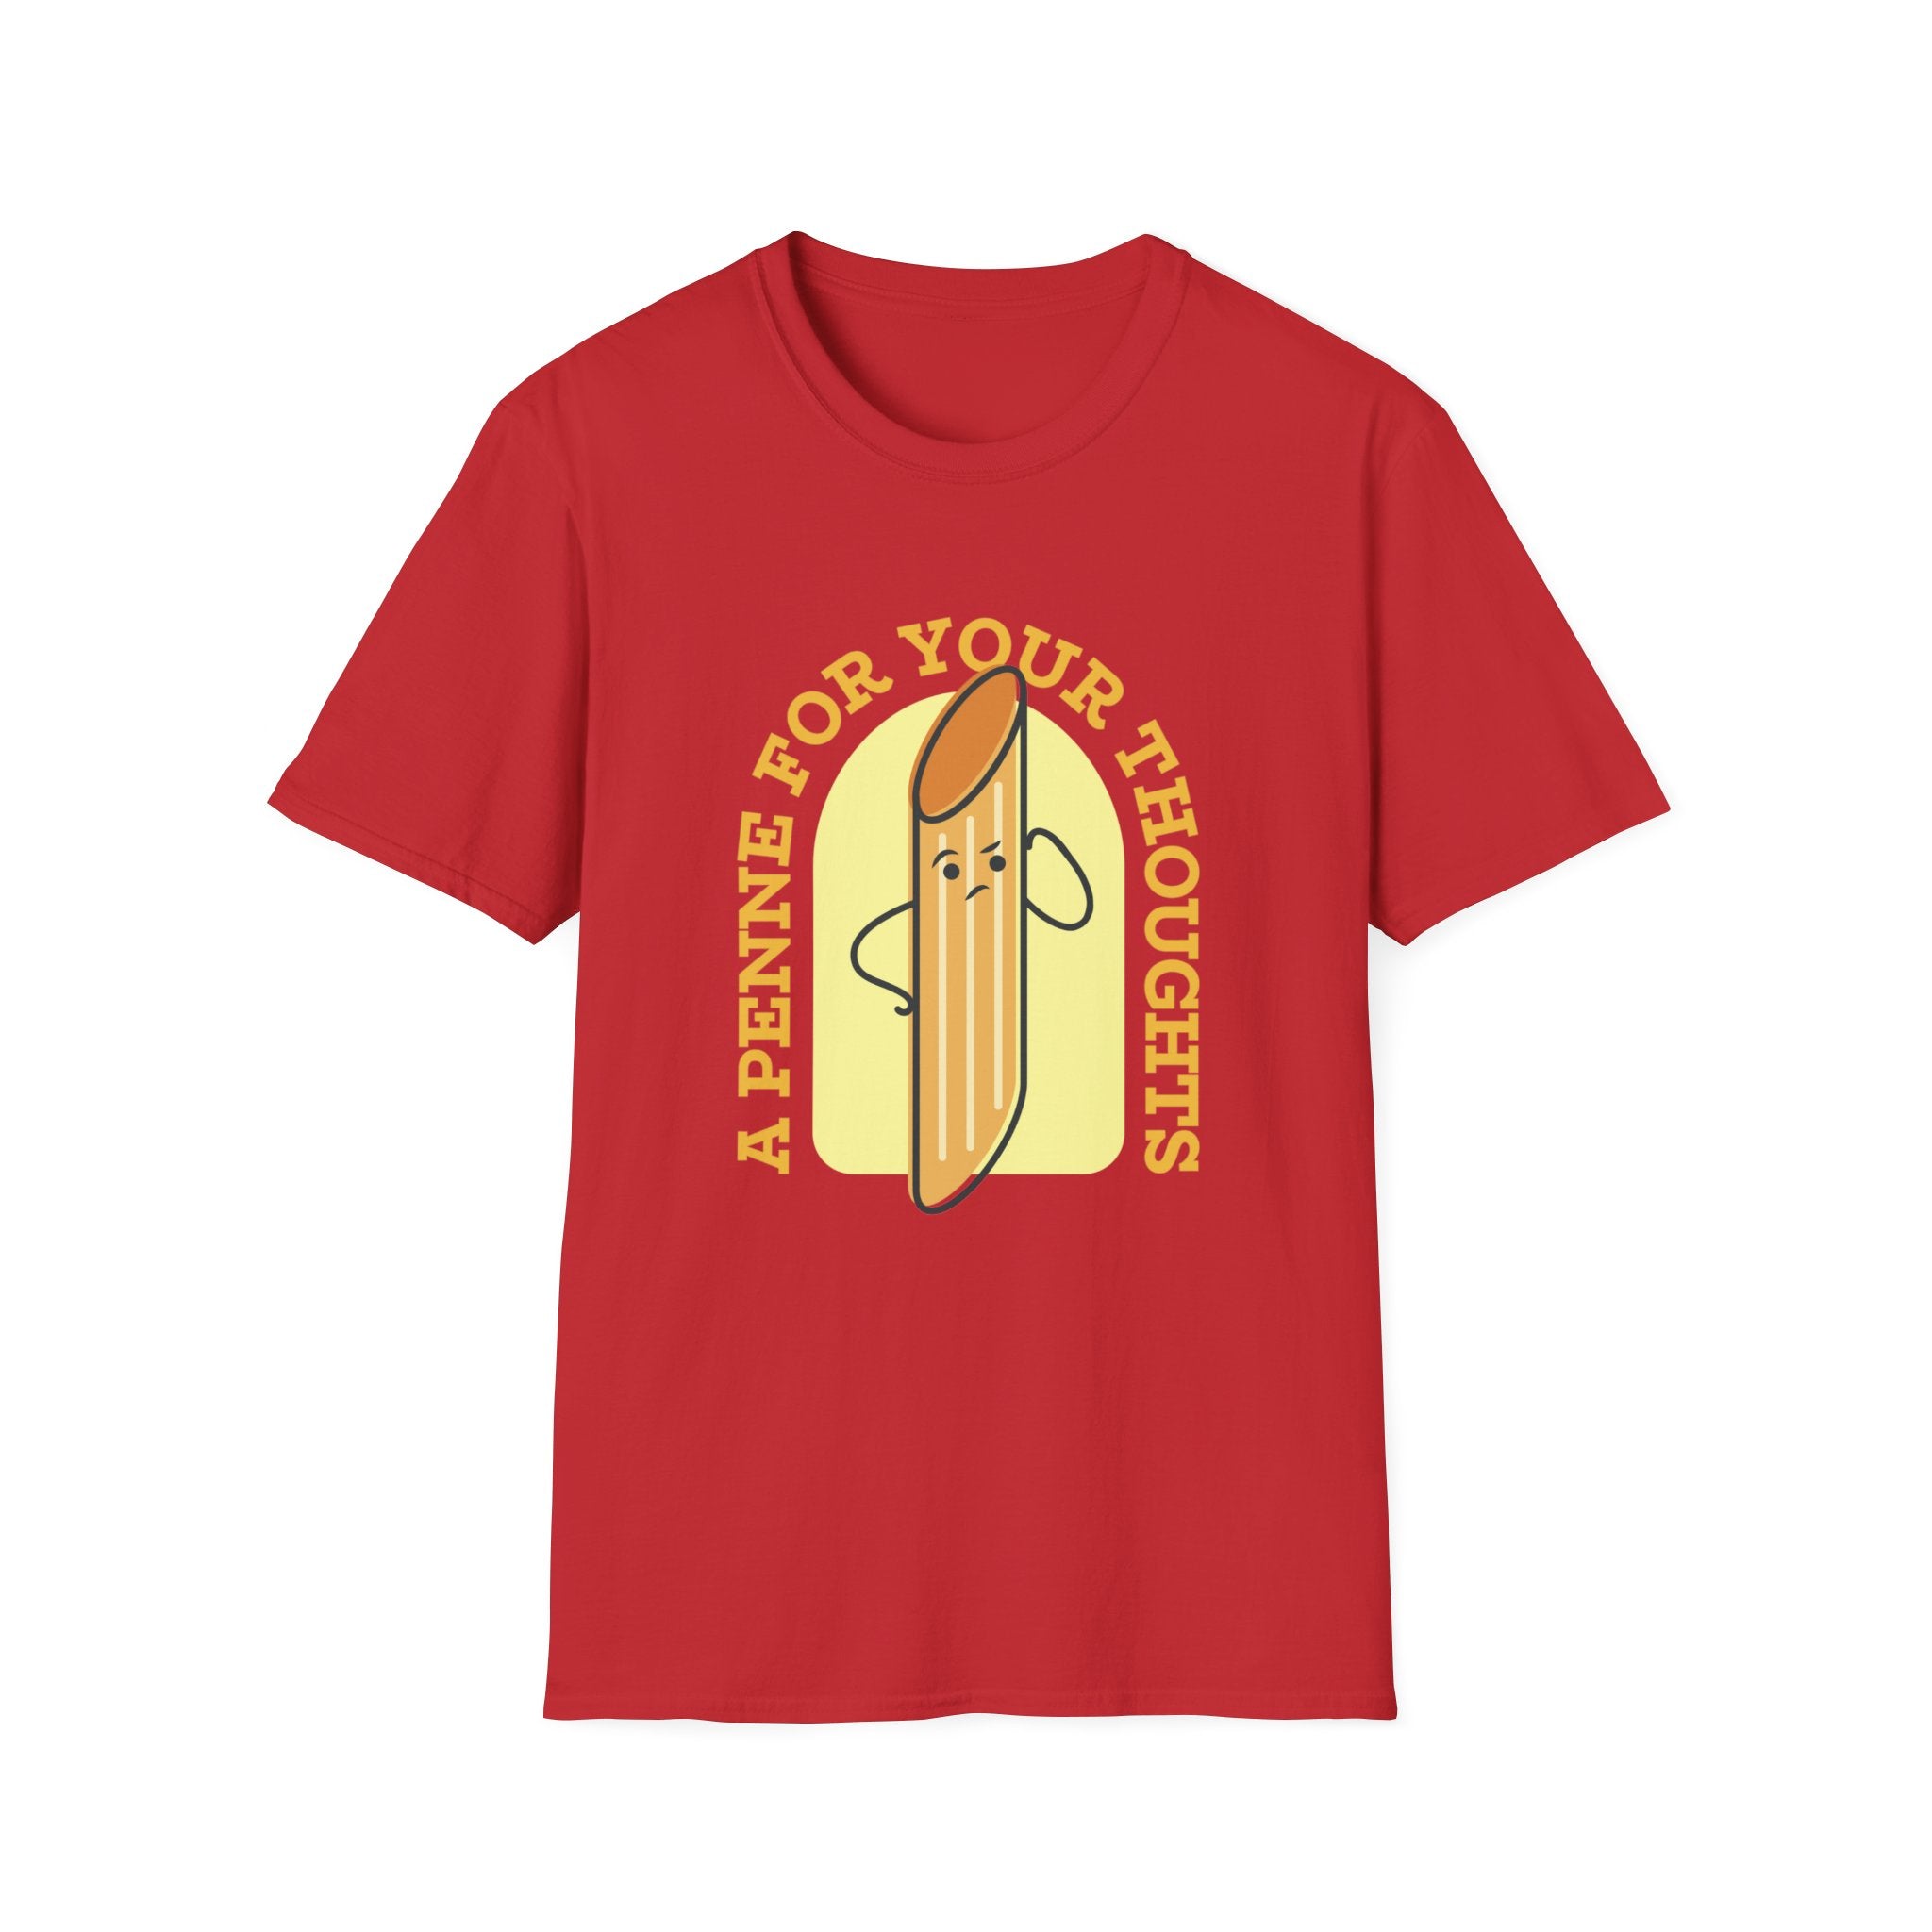 A Penne for your thoughts T-shirt